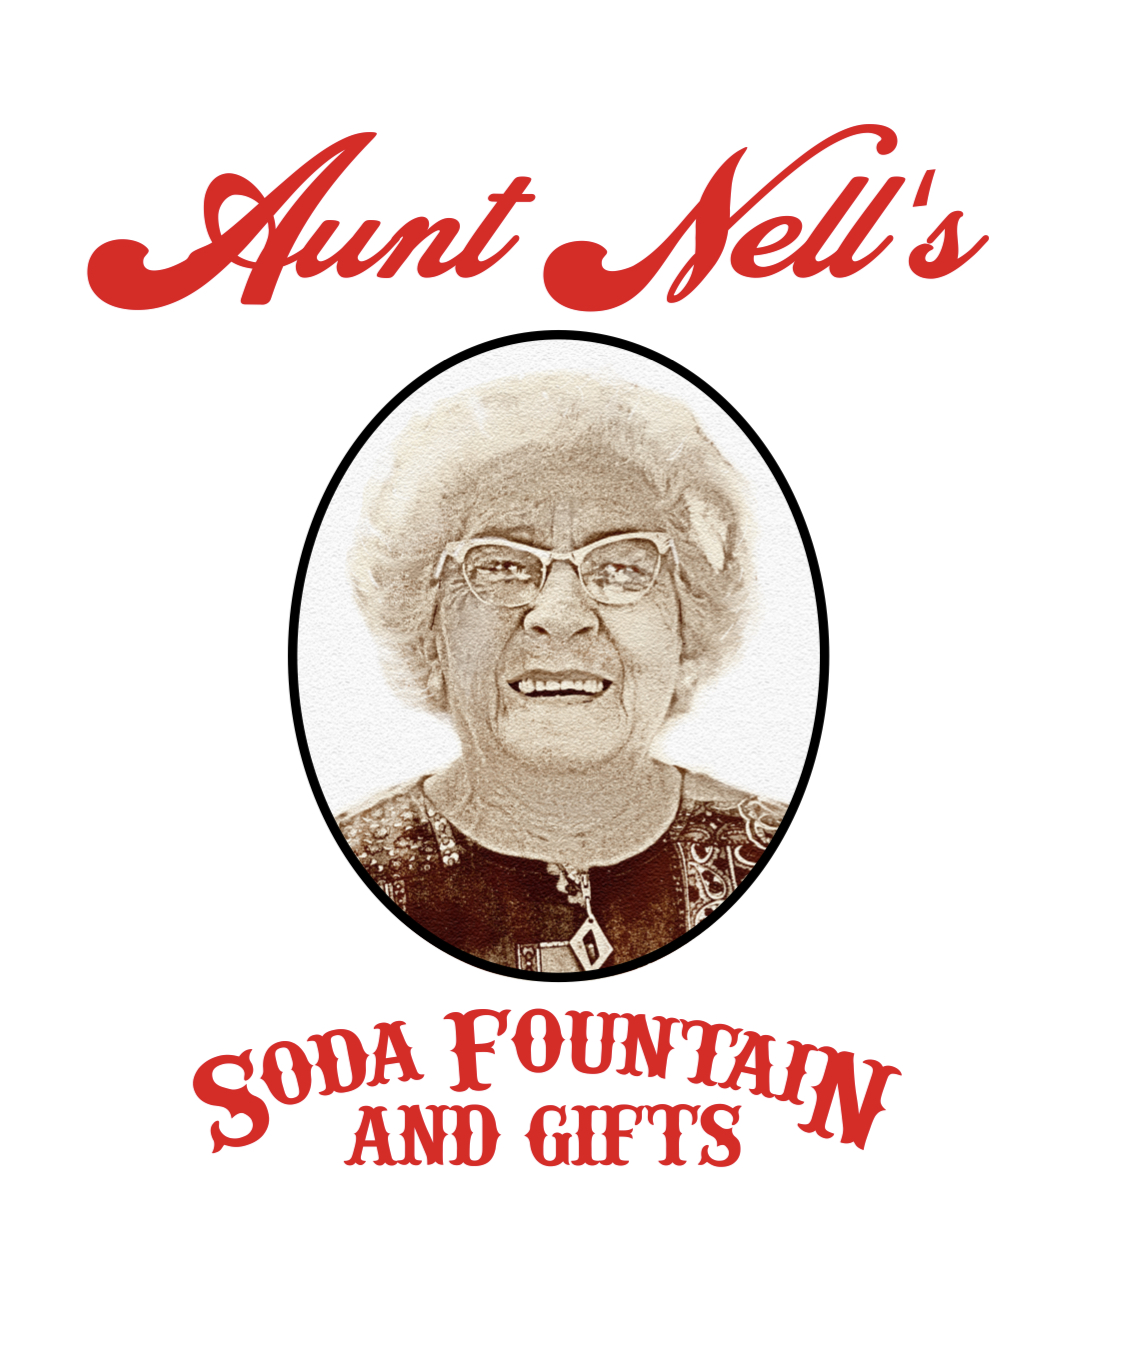 AUNT NELL'S - $15 CERTIFICATE